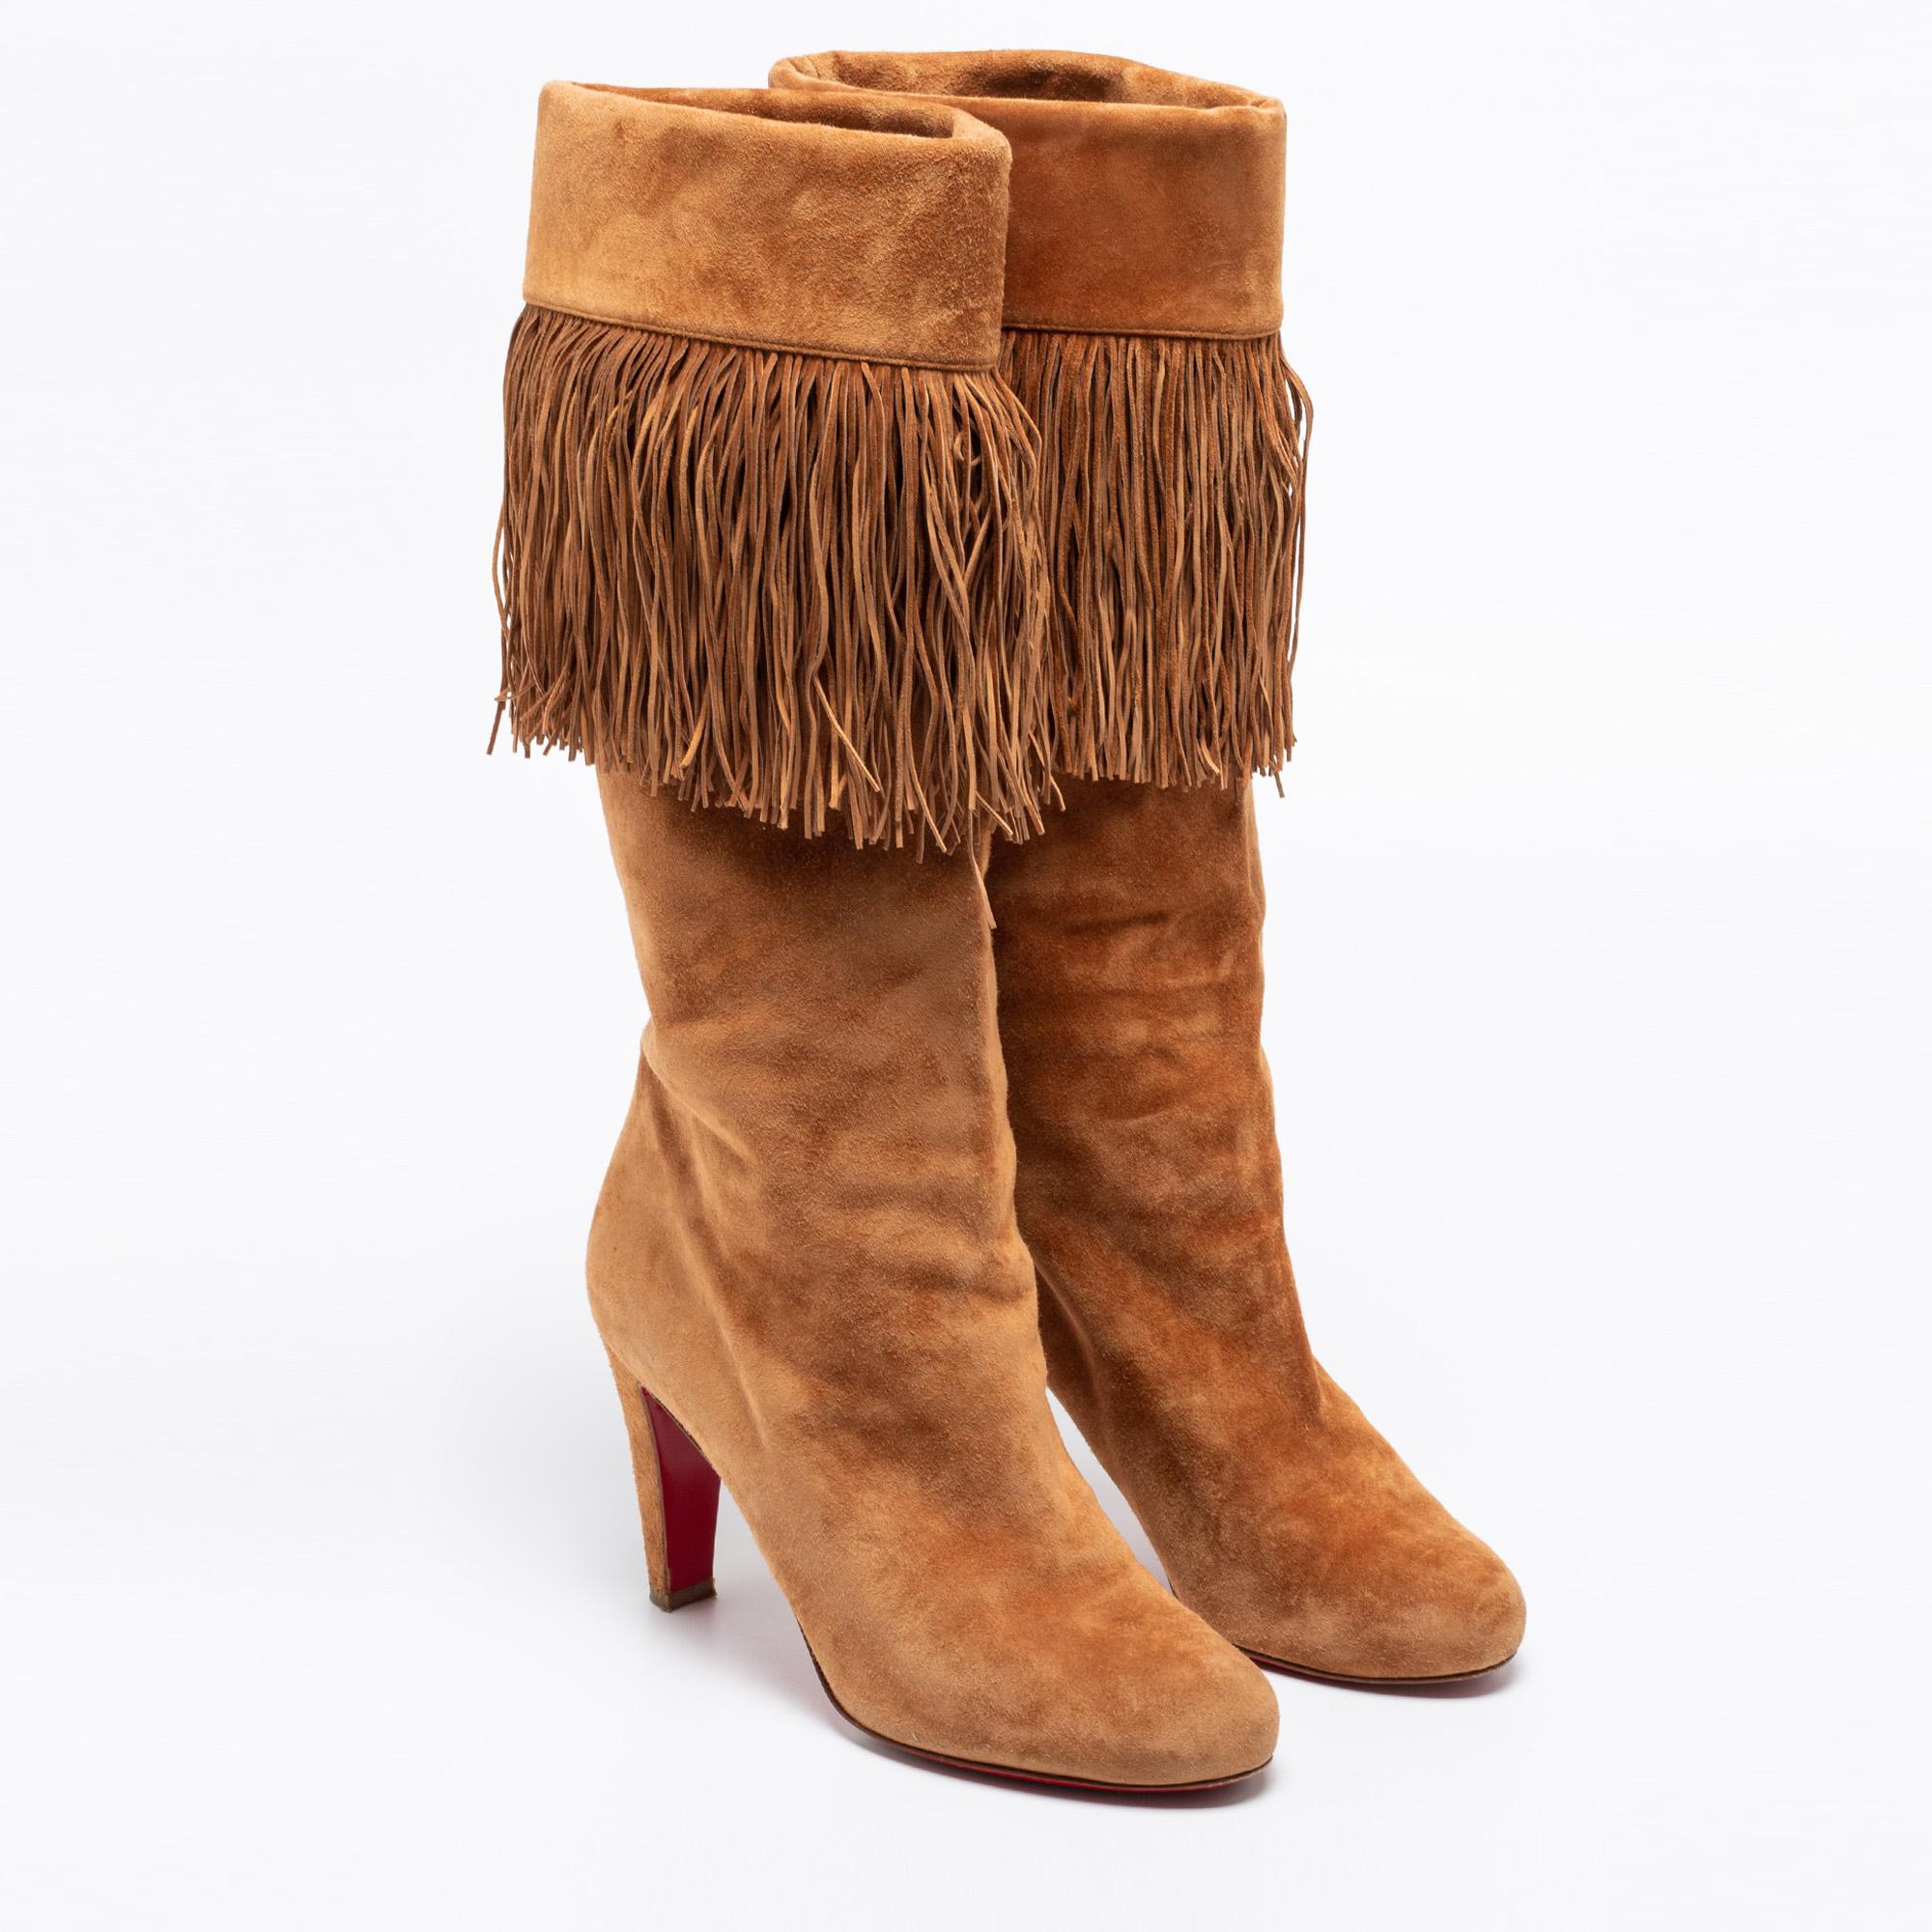 Christian Louboutin Brown Suede Fringe Mid Calf Boots Size 38 2